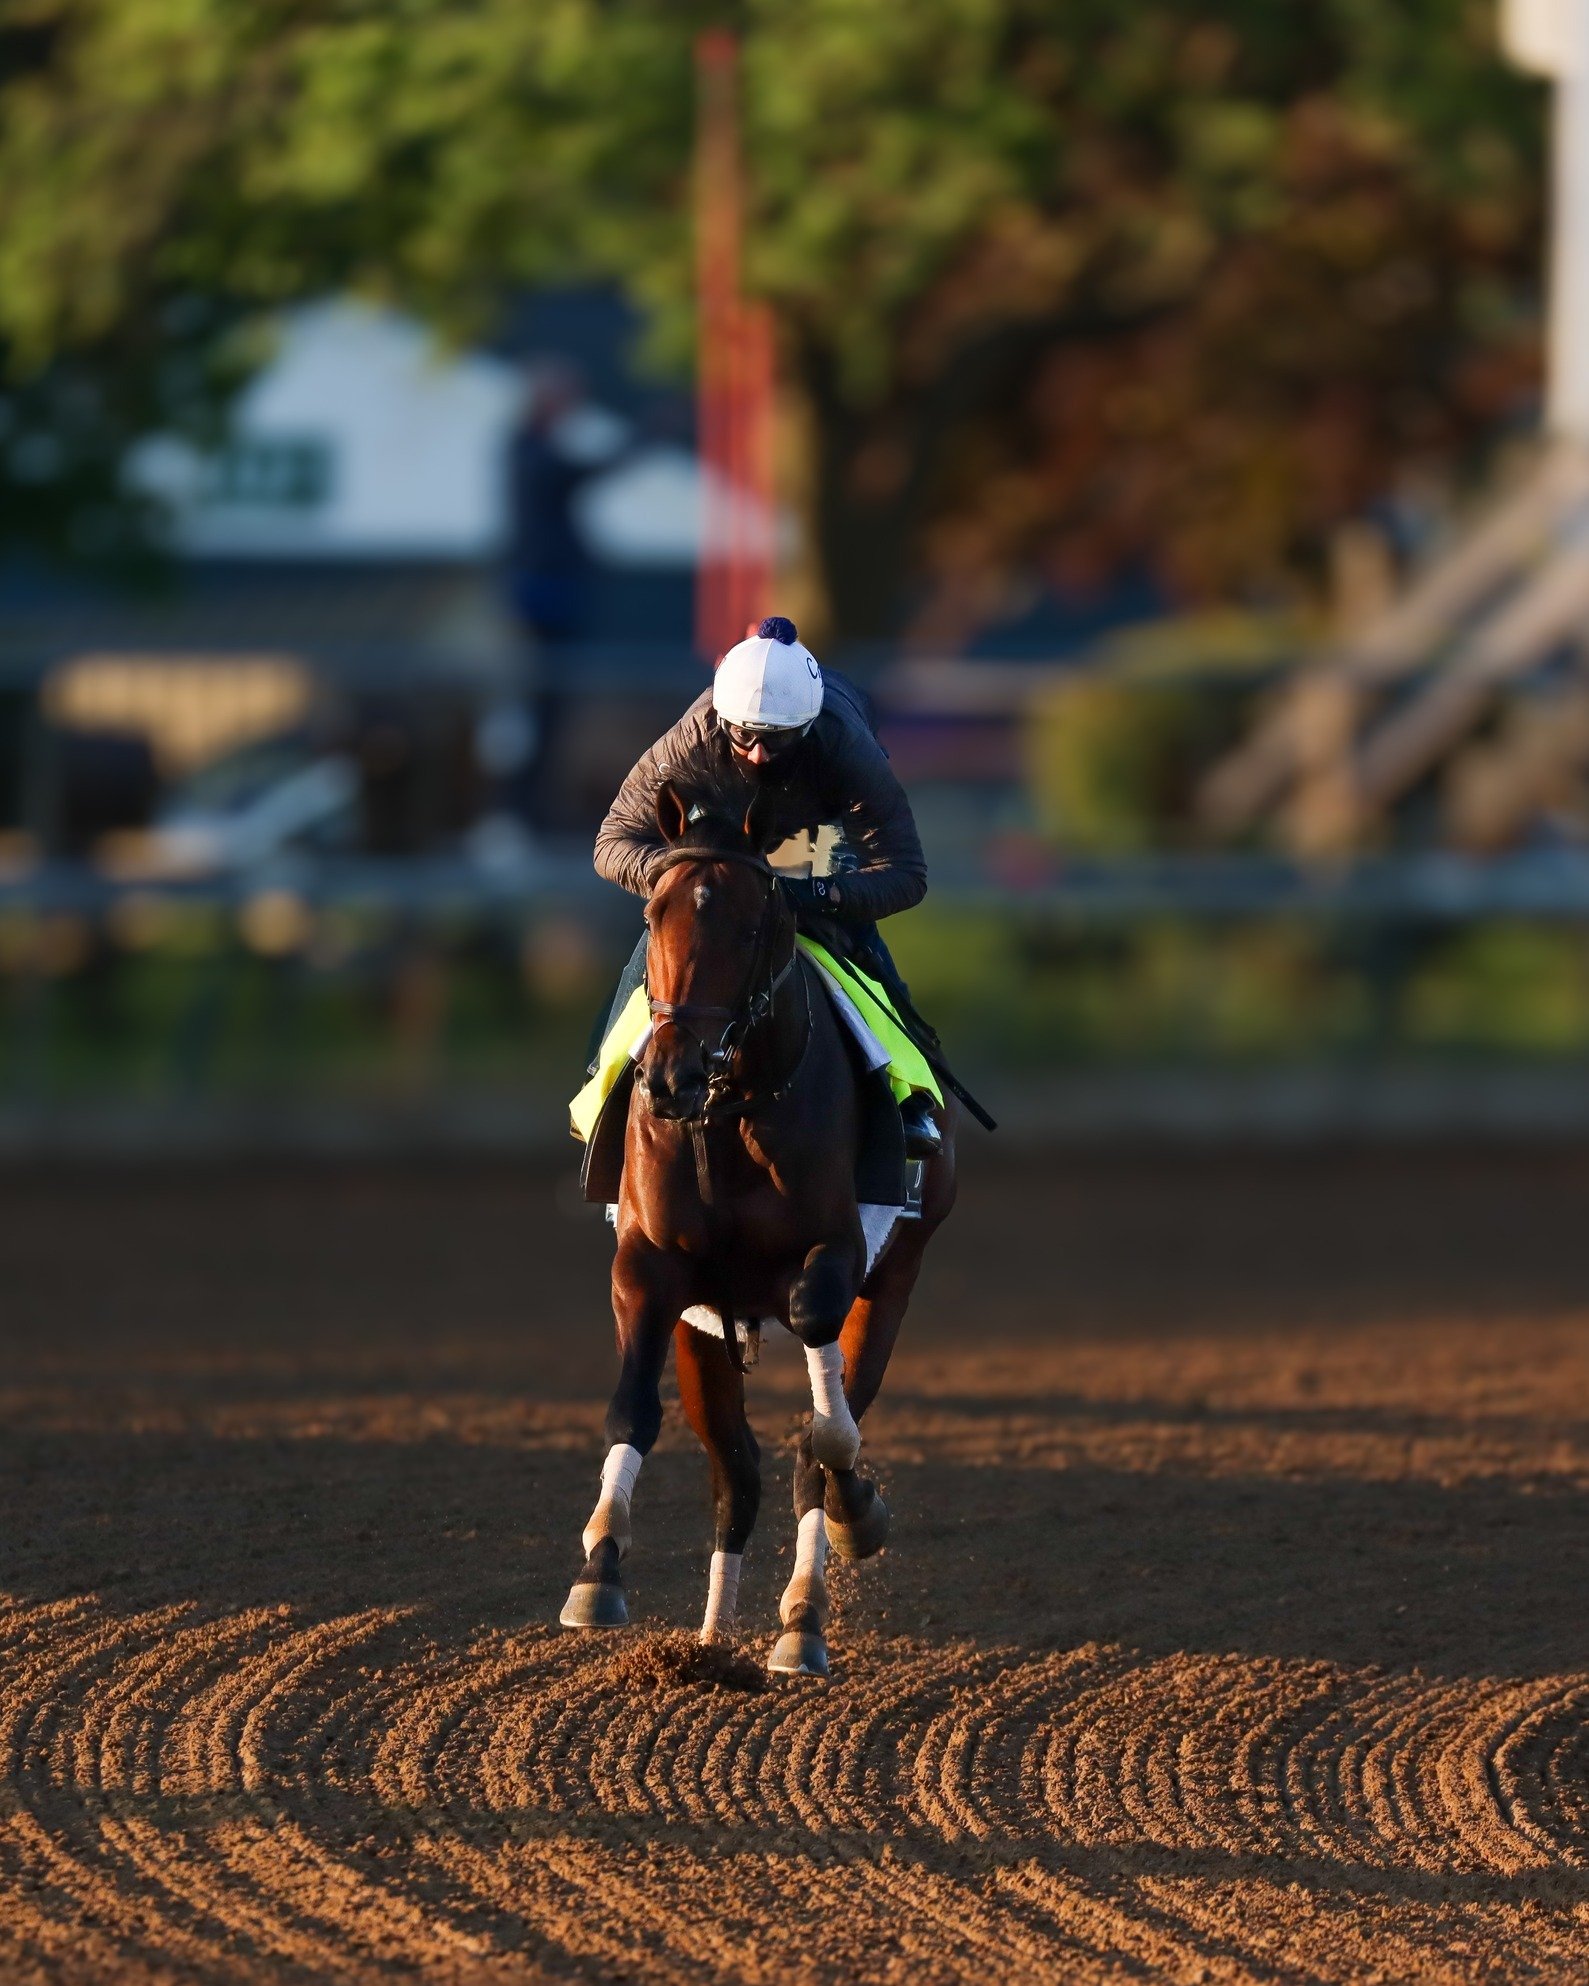 Did you know that every horse entered in the @kentuckyderby_  on Saturday had to qualify to enter the race?

The Kentucky Derby is a unique race in that it is one of the few where connections not only have to nominate their horse to run but the horse